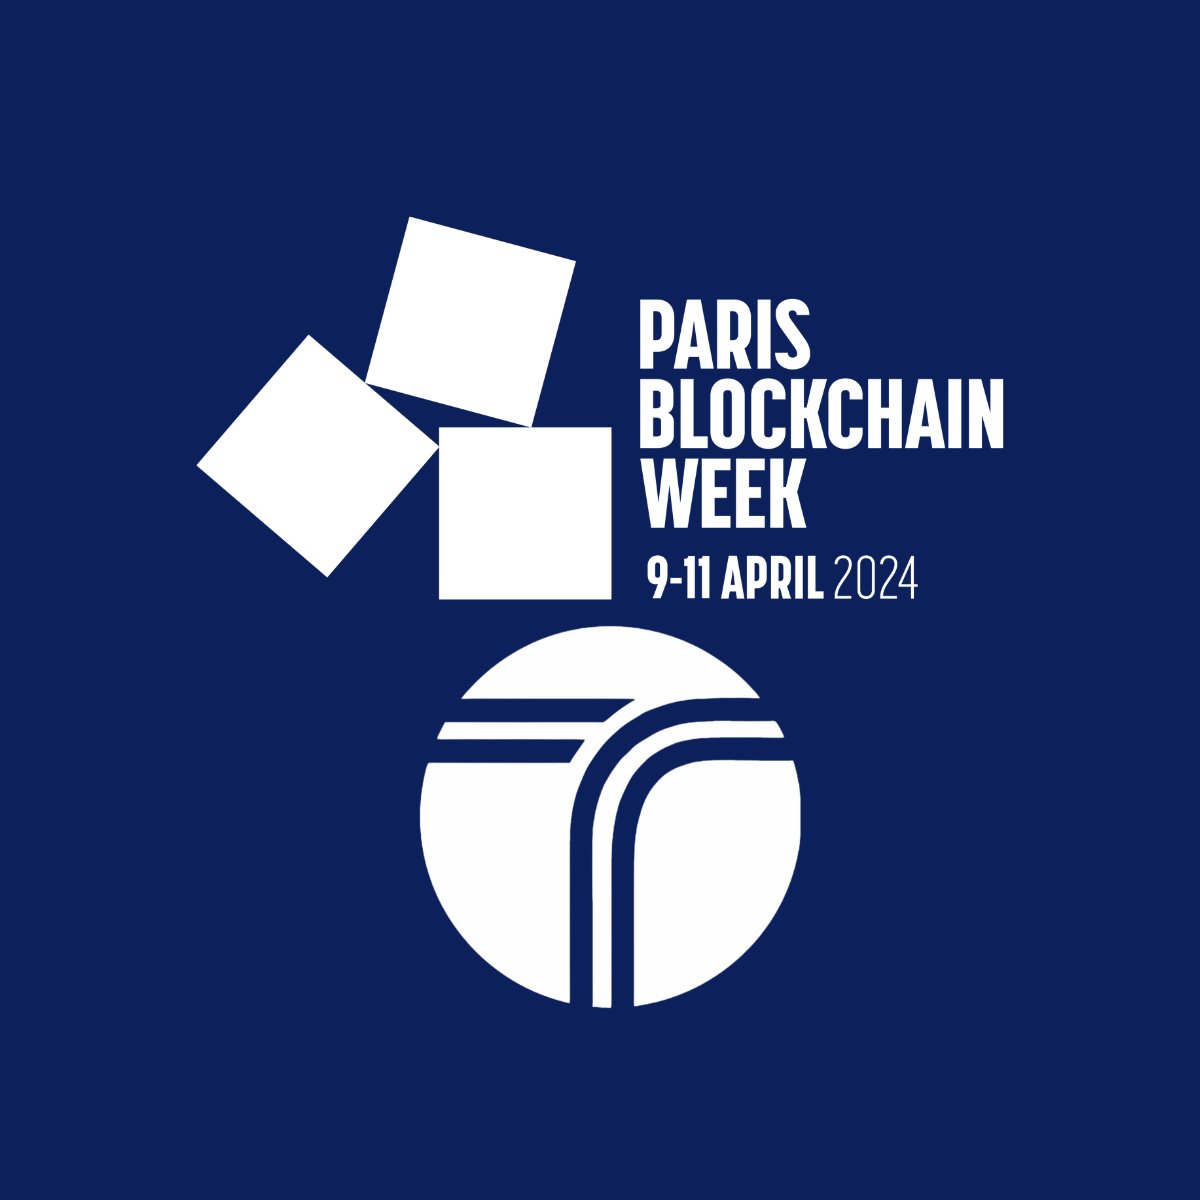 We are headed to the City of Light next week for @ParisBlockWeek at the Le Carrousel Du Louvre🇫🇷 If you're interested in discussing valuation or anything crypto related, make sure to stop by booth 54. DM us if you plan on attending👍